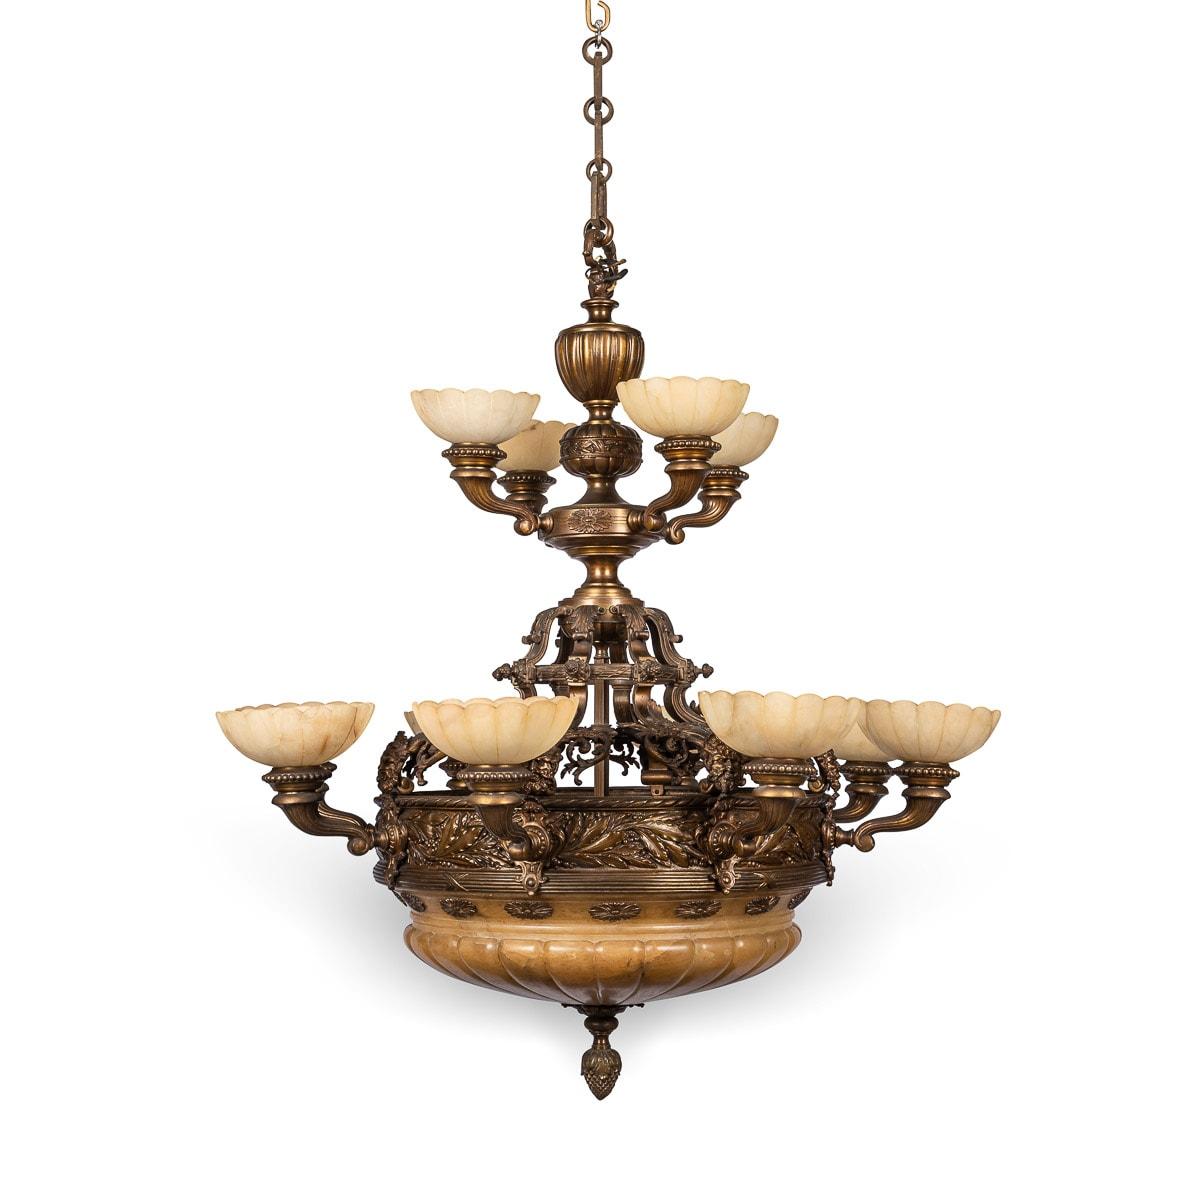 Antique early 20th Century French Empire style cast bronze and alabaster 12 bulb chandelier. Decorated with laurel leaves, reeded boarders and branches applied with Bacchus masks and acanthus leaves. Alabaster is a natural translucent stone that